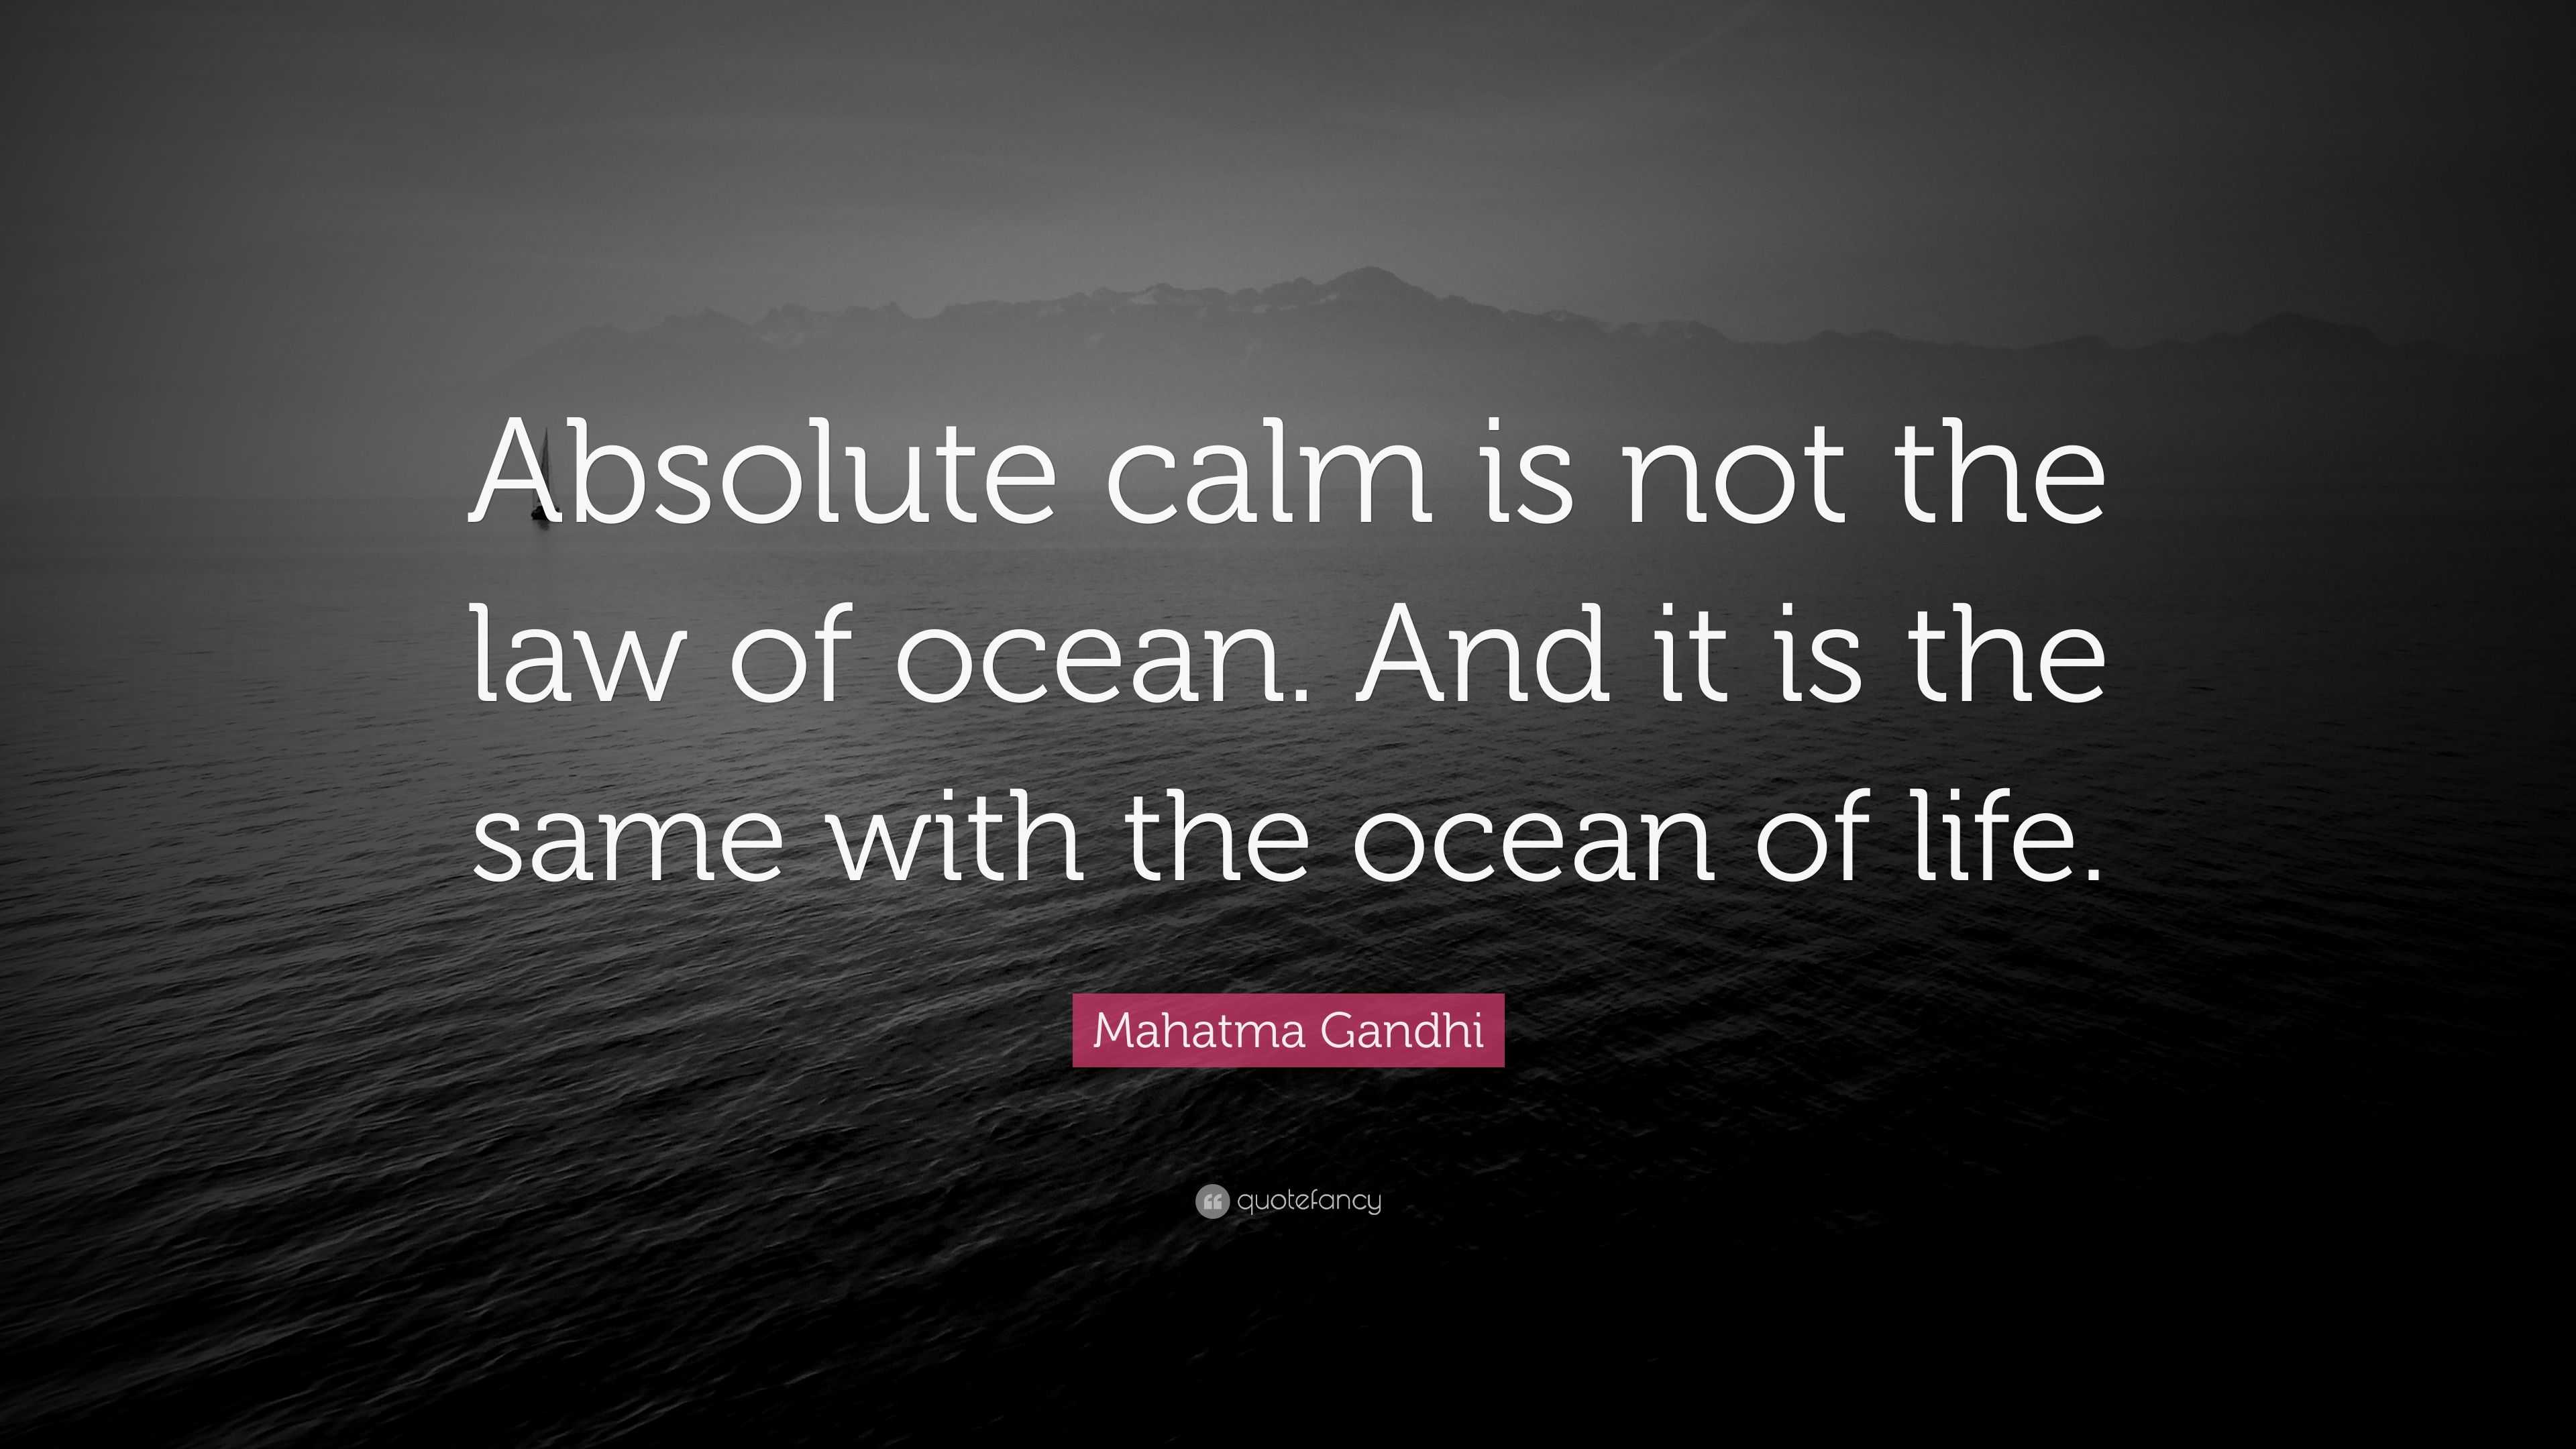 Mahatma Gandhi Quote: “Absolute calm is not the law of ocean. And it is